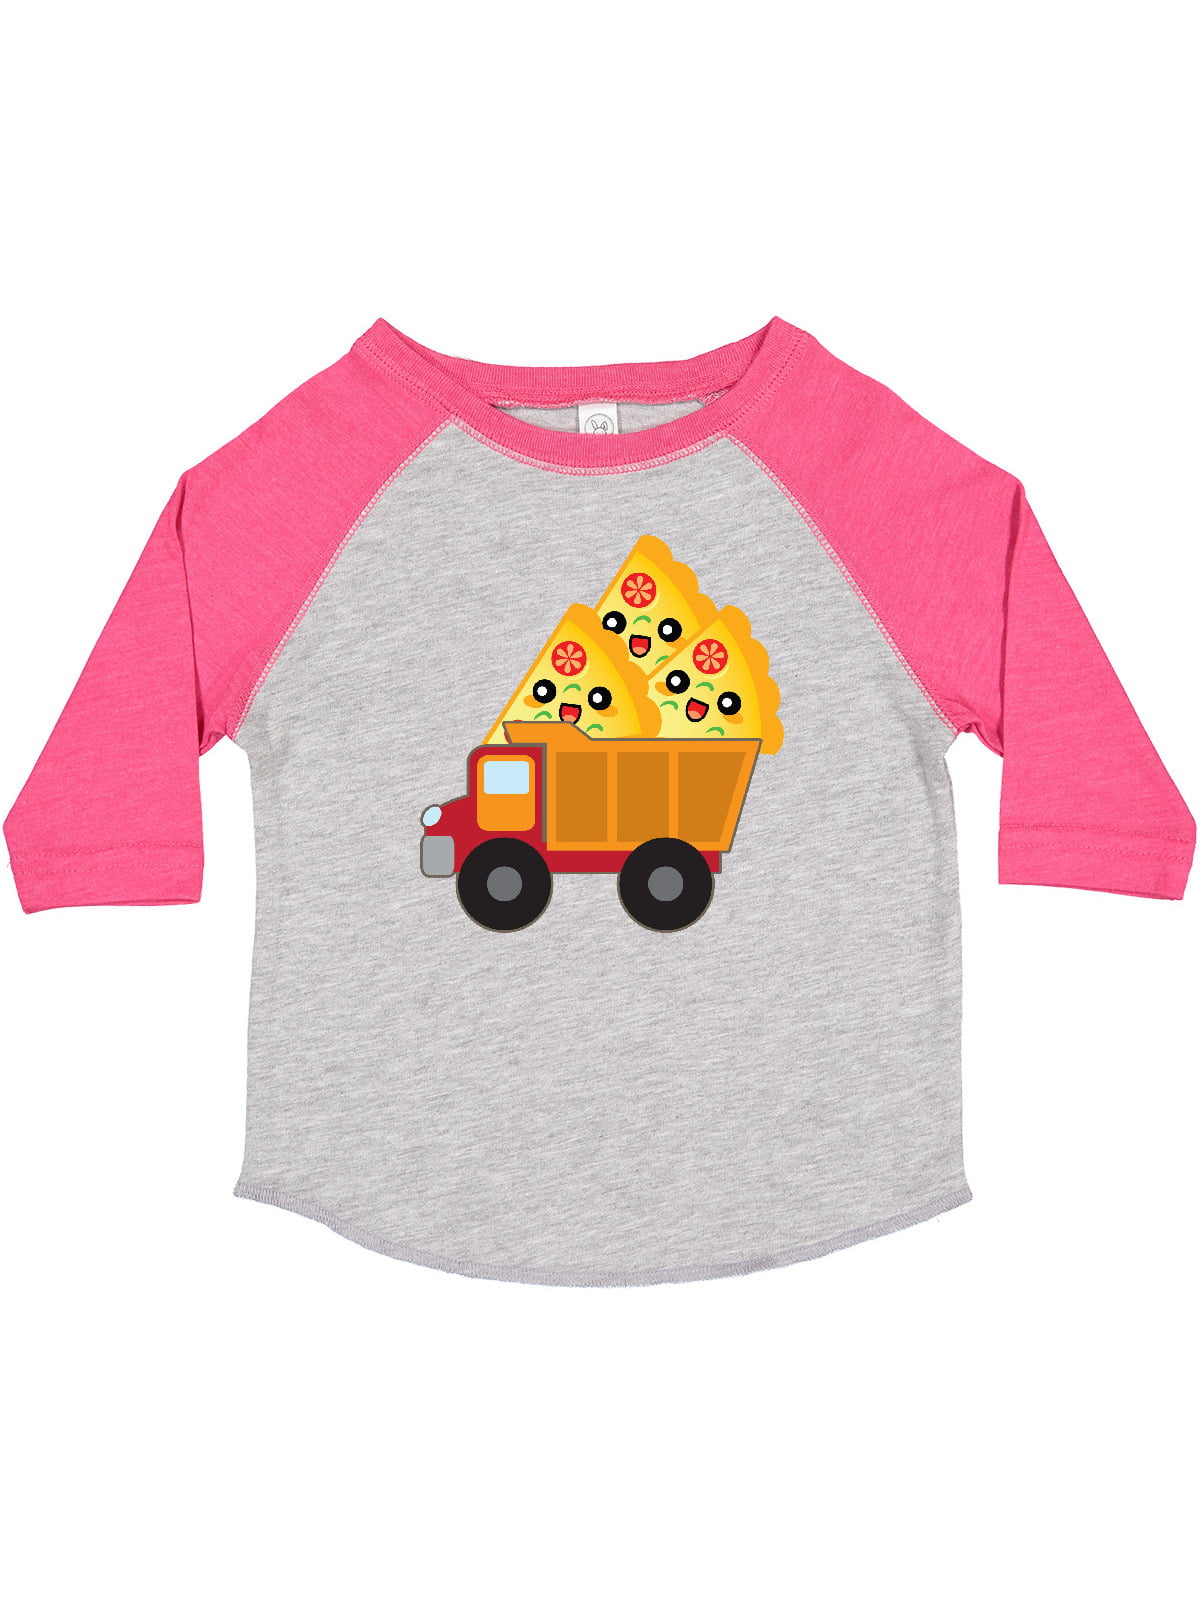 2T and 3T Toddler T Shirt Heather Gray 100% Cotton Funny Kids Tee Children's T-Shirt Shirts With Sayings Just Here For The Snacks